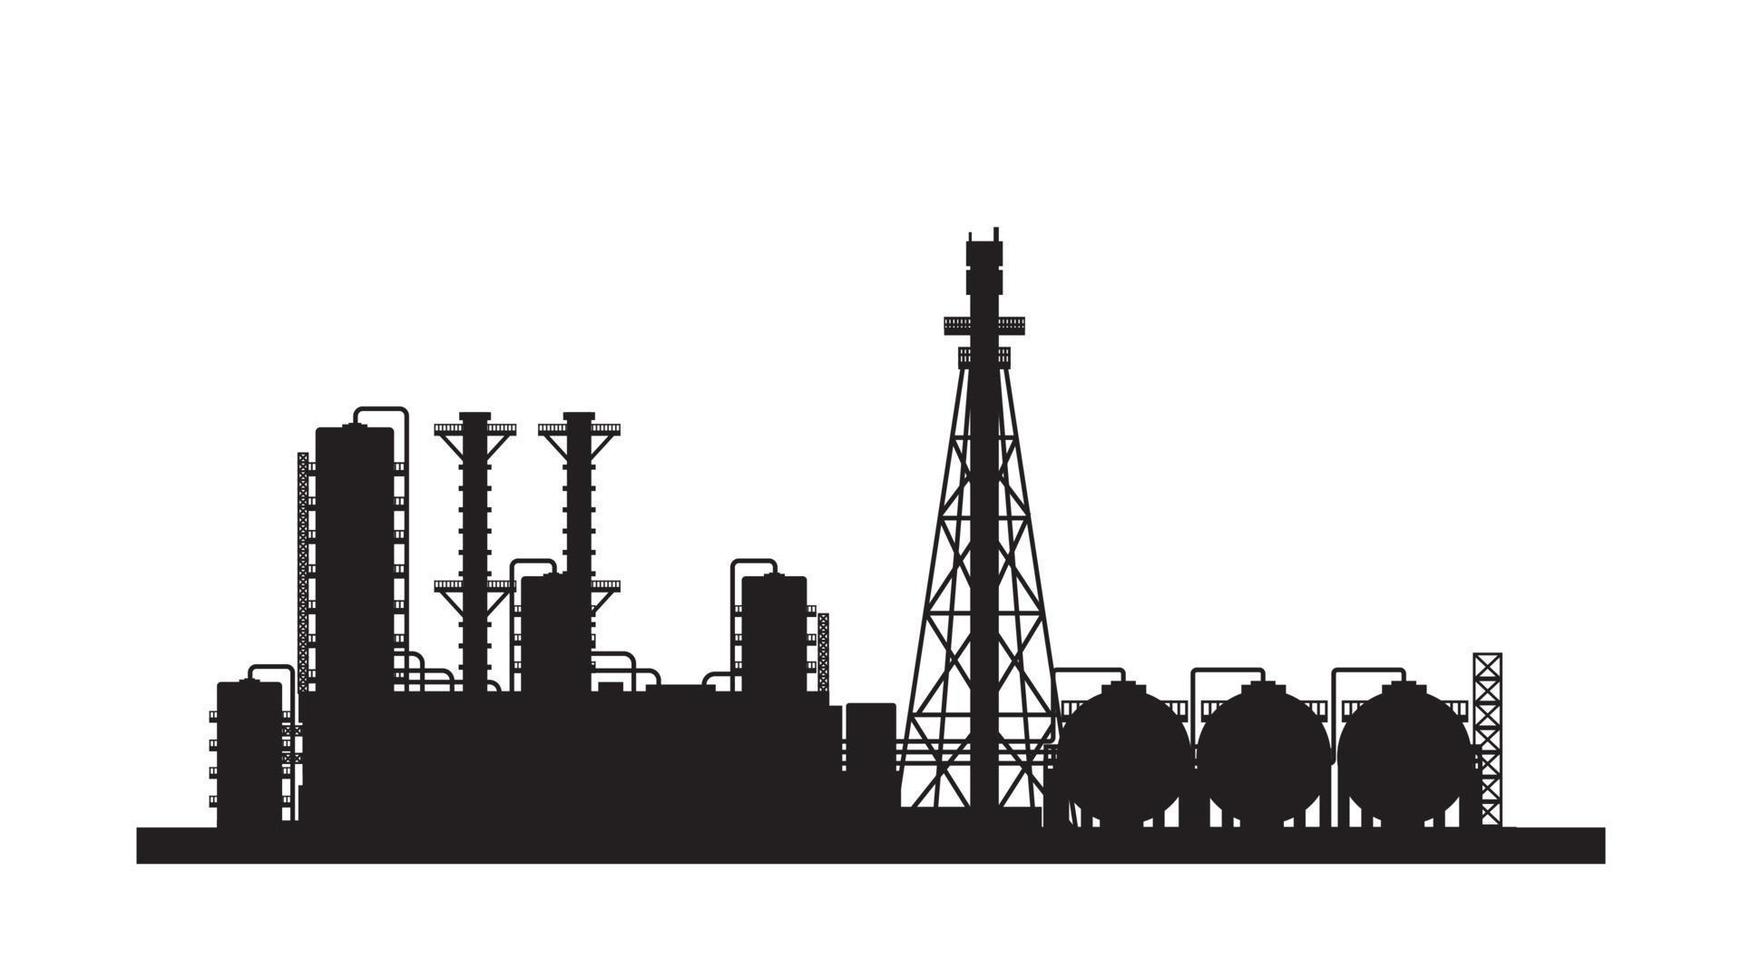 Oil Refinery Plant and Chemical Factory Silhouette vector illustration